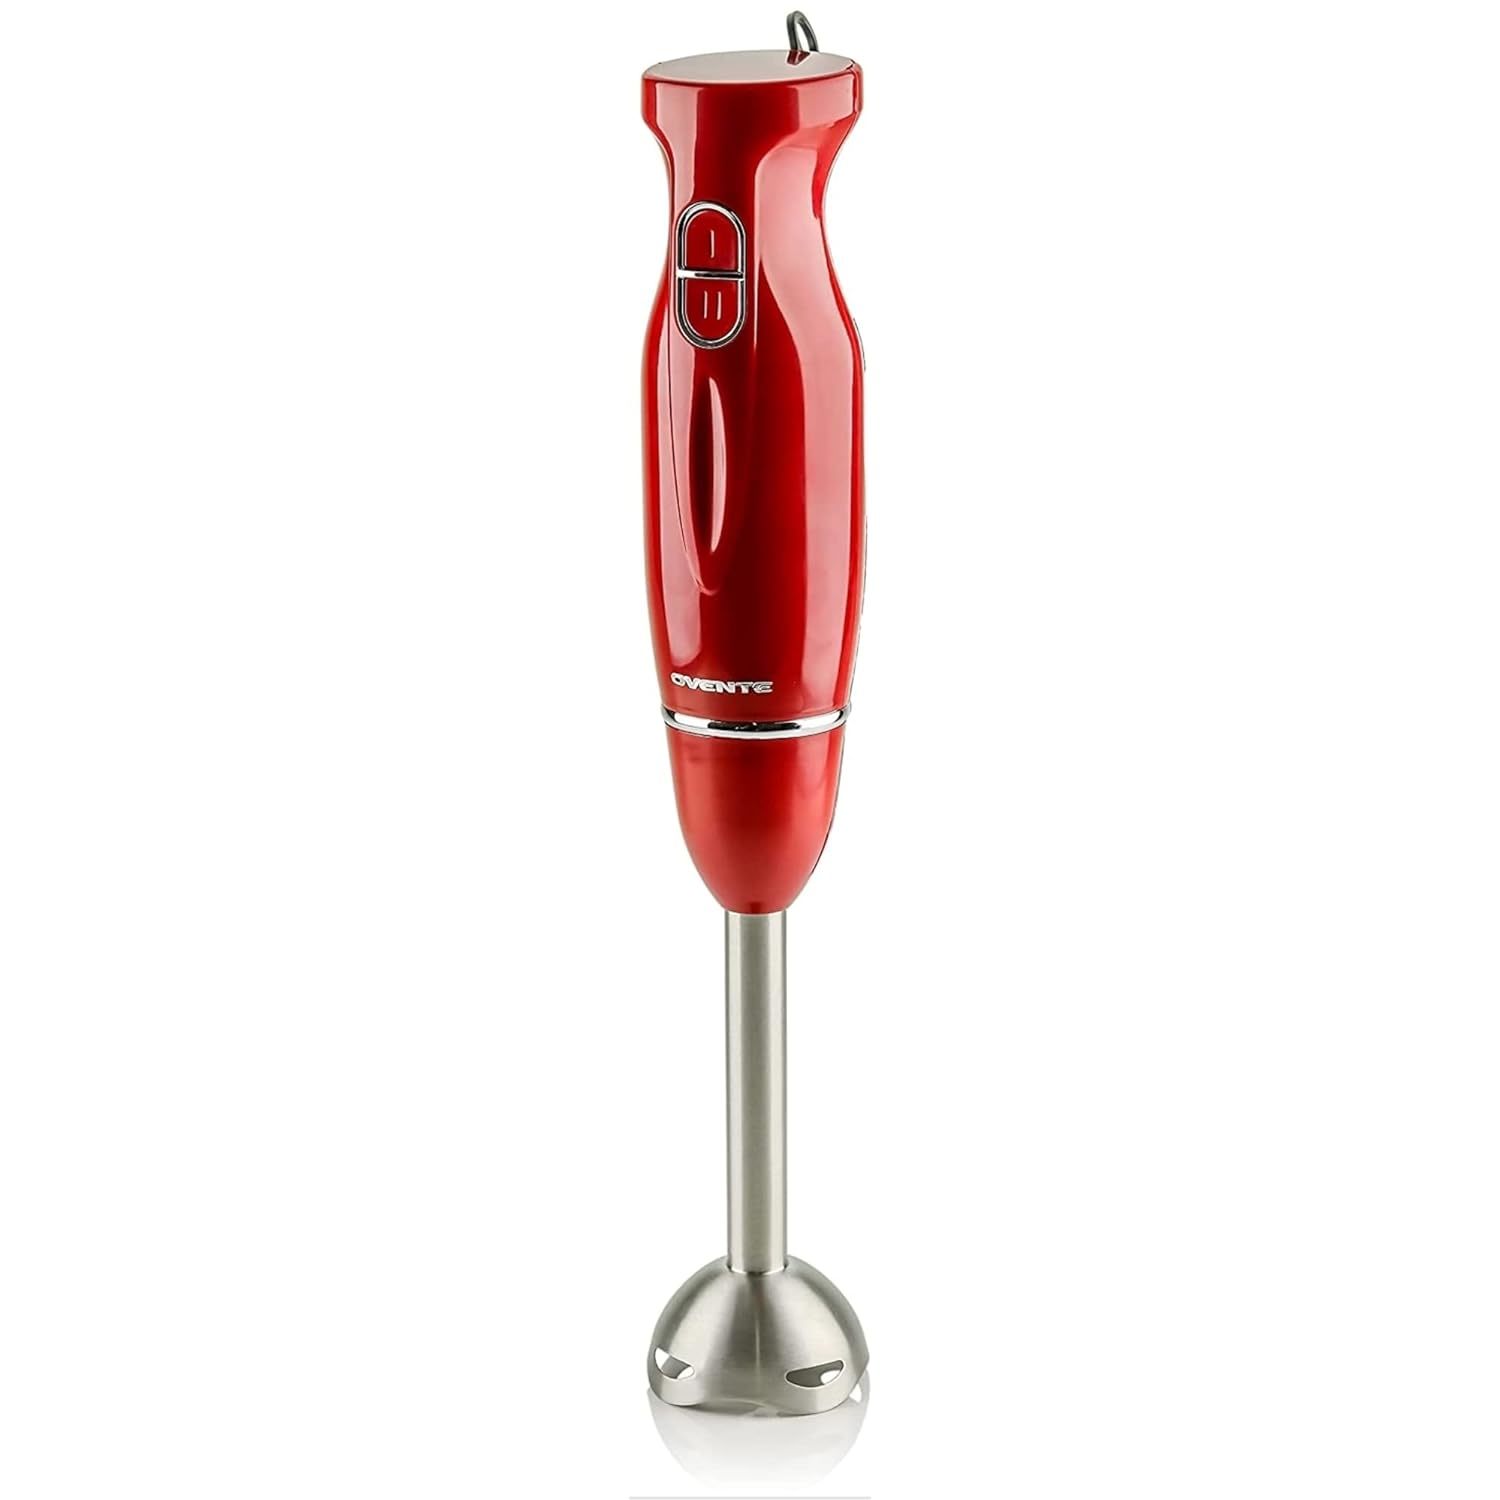 Ovente Electric Immersion Hand Blender 300 Watt 2 Mixing Speed with Stainless St - $22.79